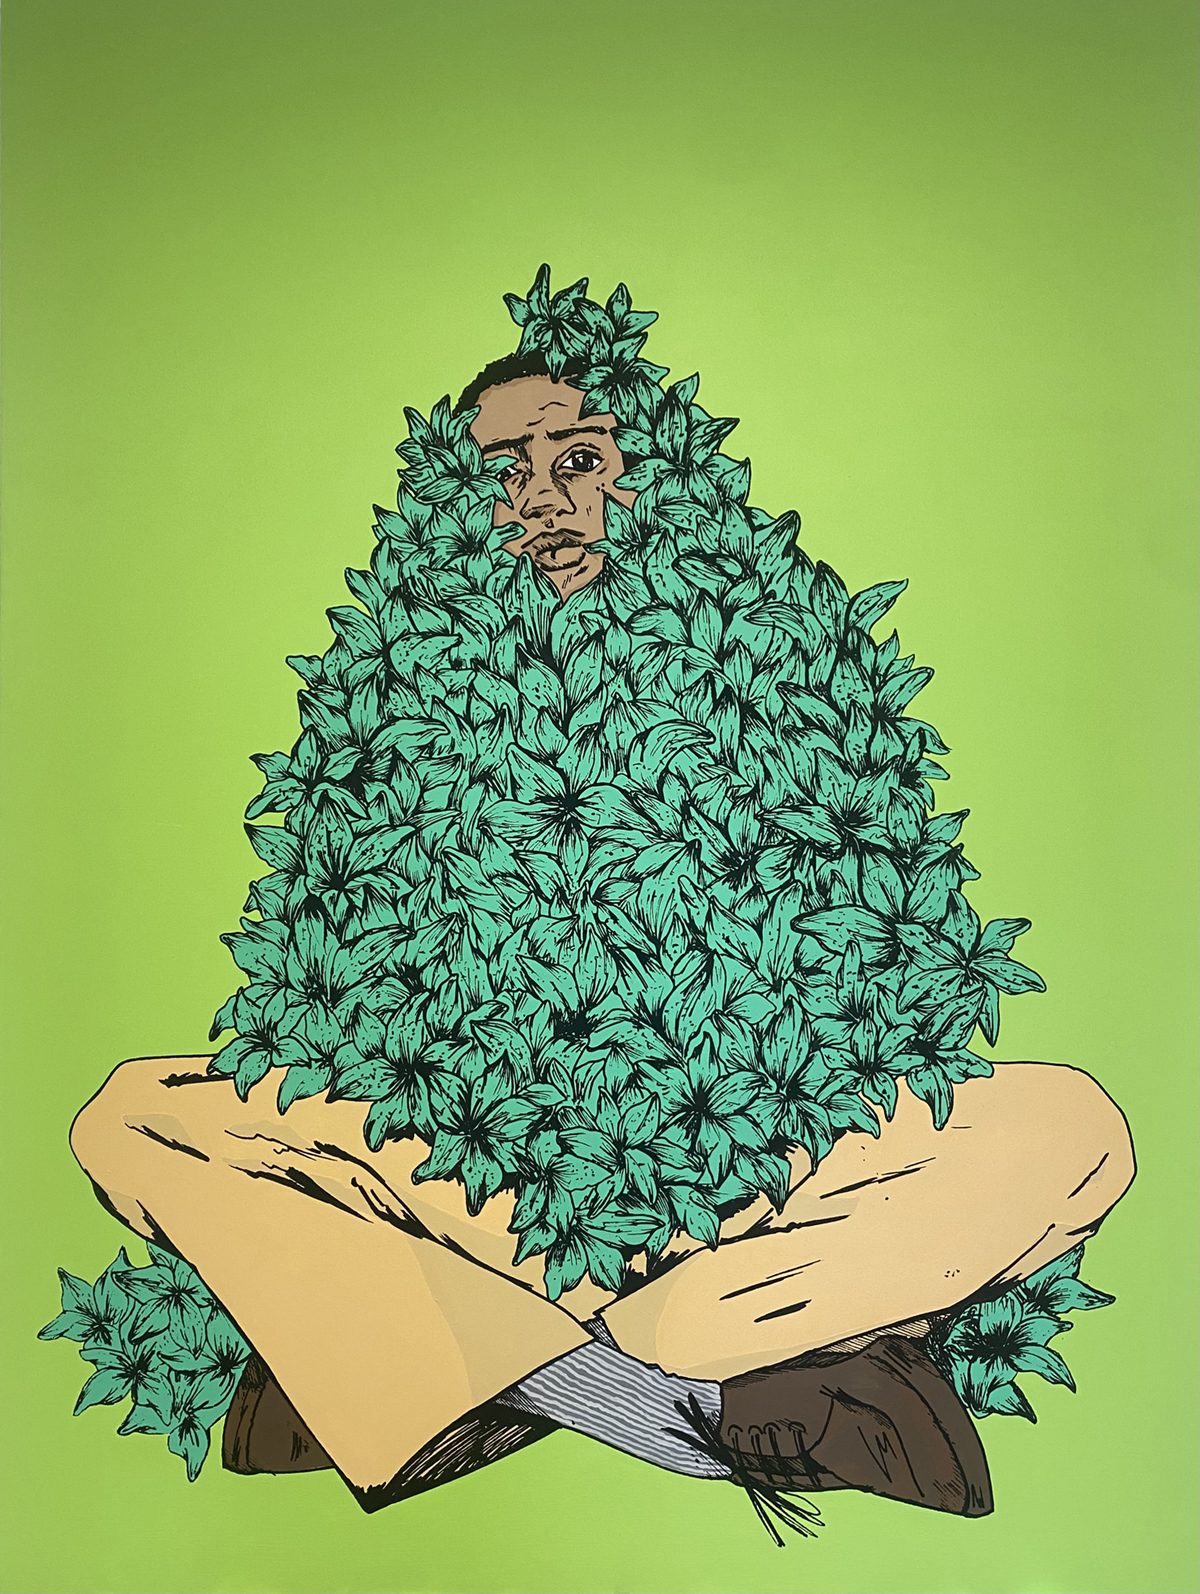 A man sits cross-legged against a green background, with a bush over his body.